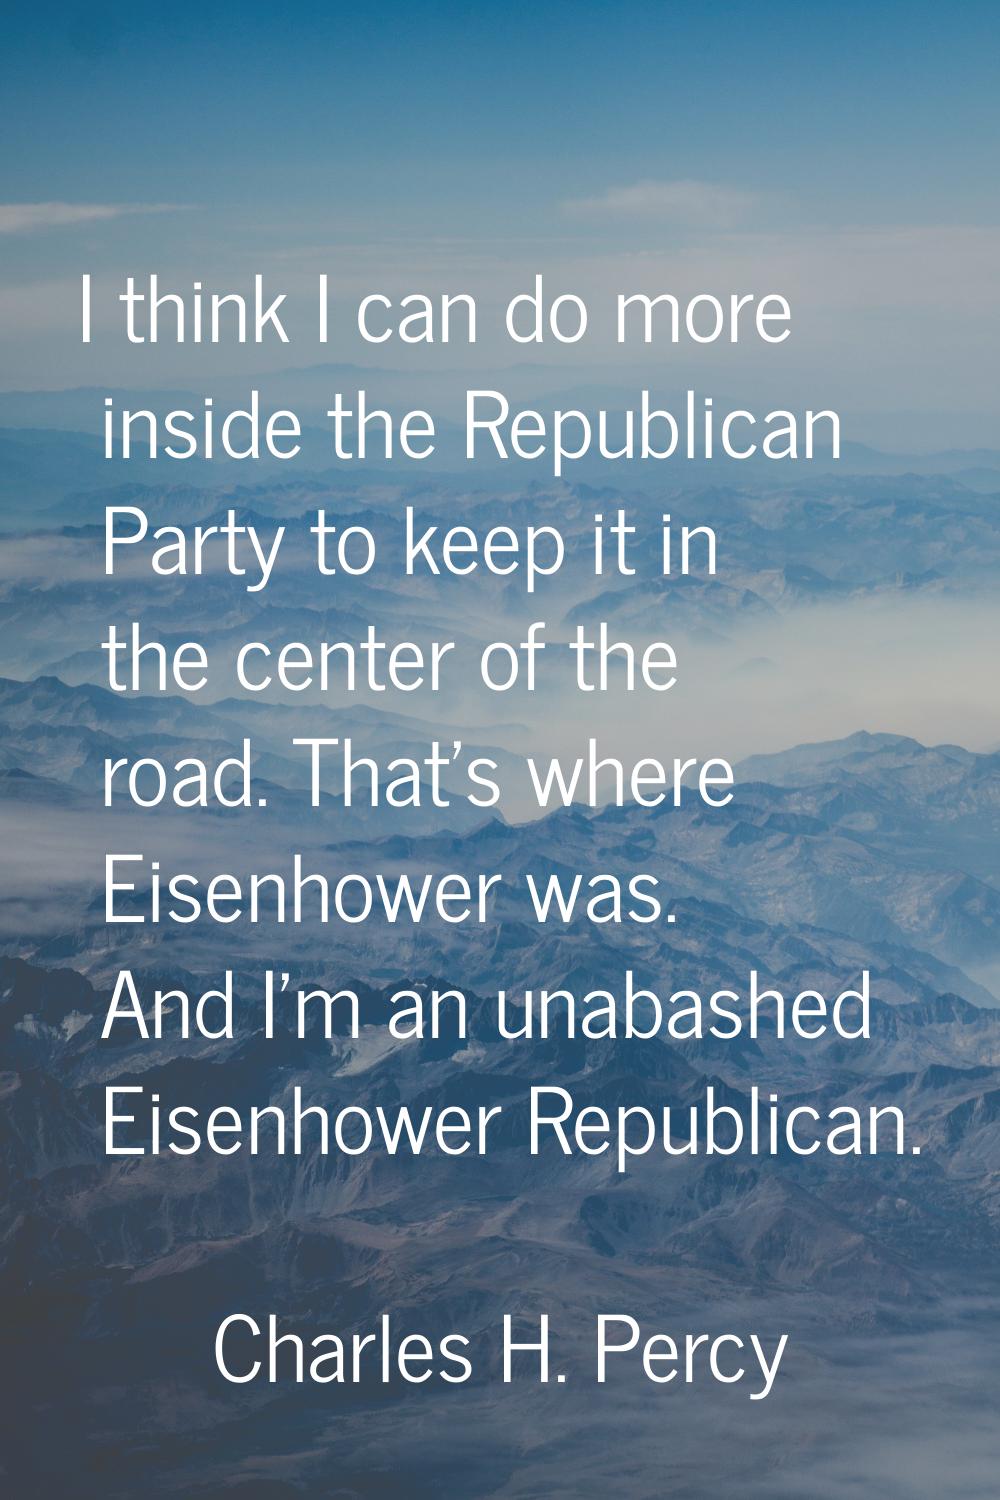 I think I can do more inside the Republican Party to keep it in the center of the road. That's wher